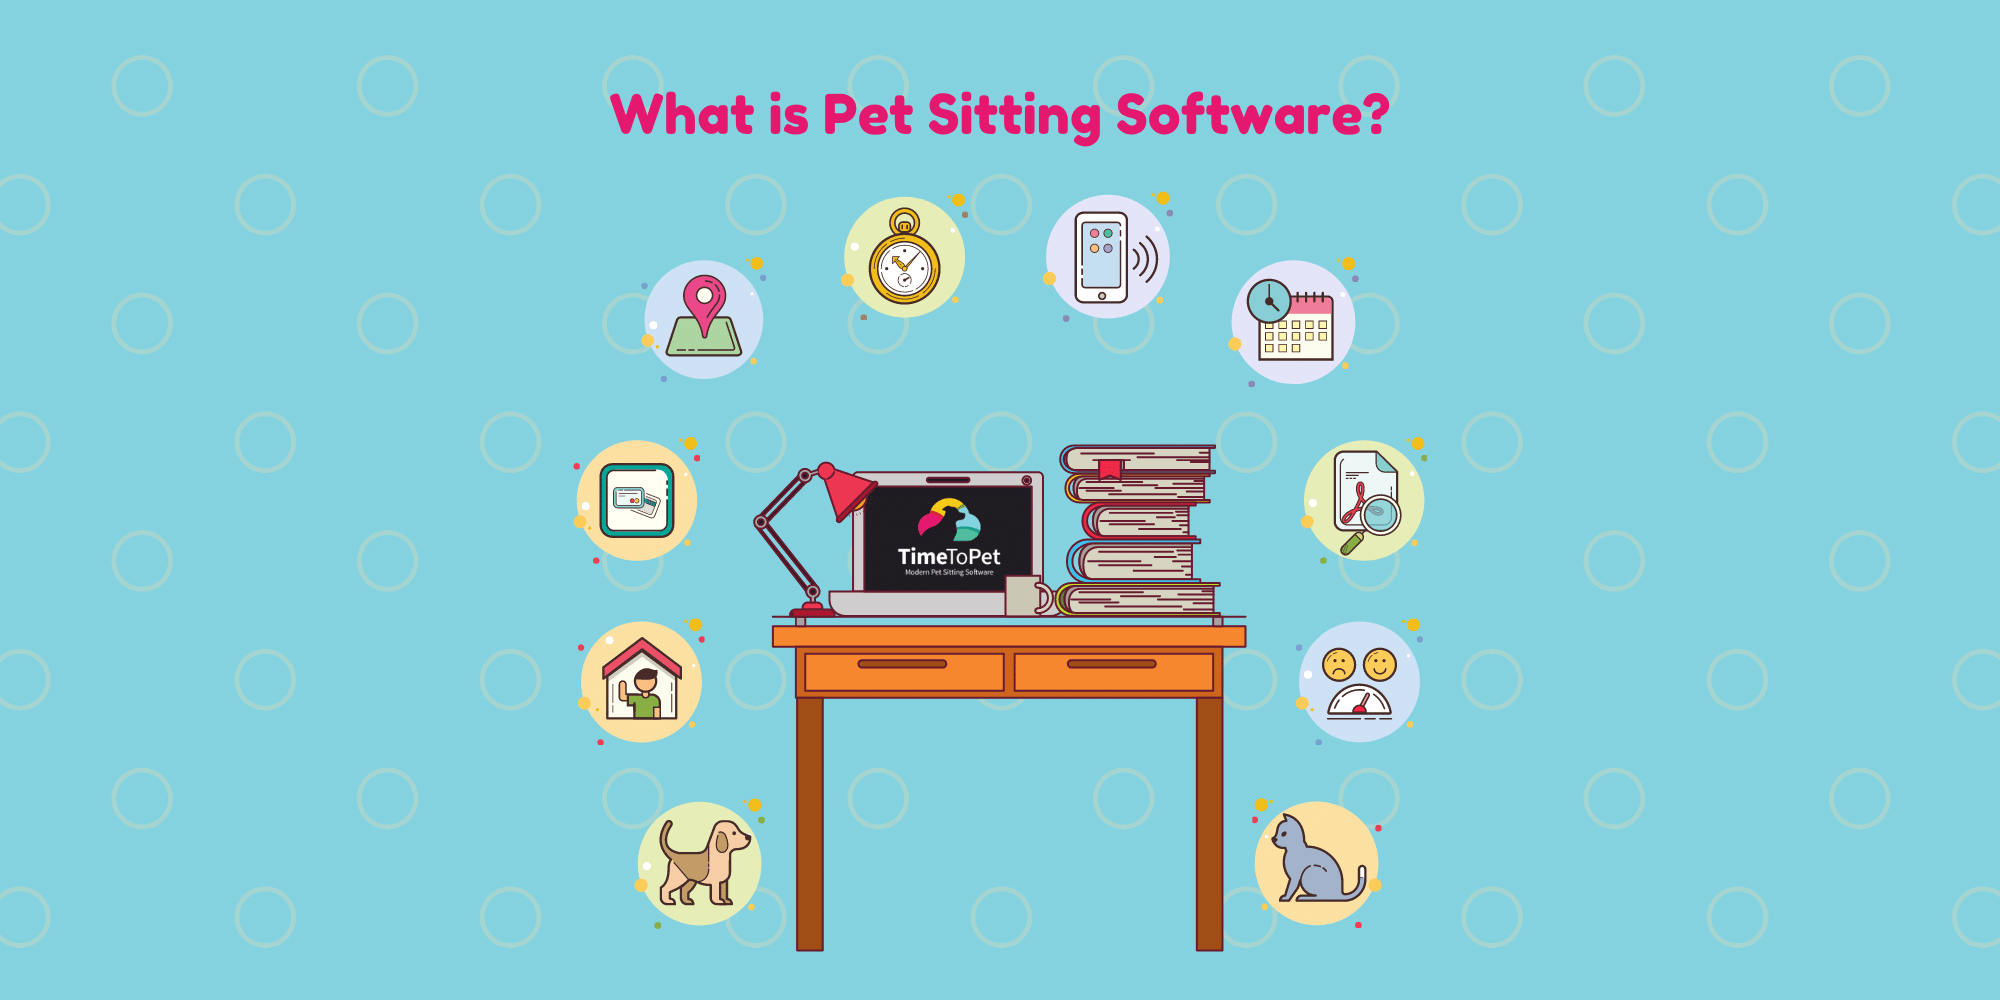 What-is-Pet-Sitting-Software-summary-image.png